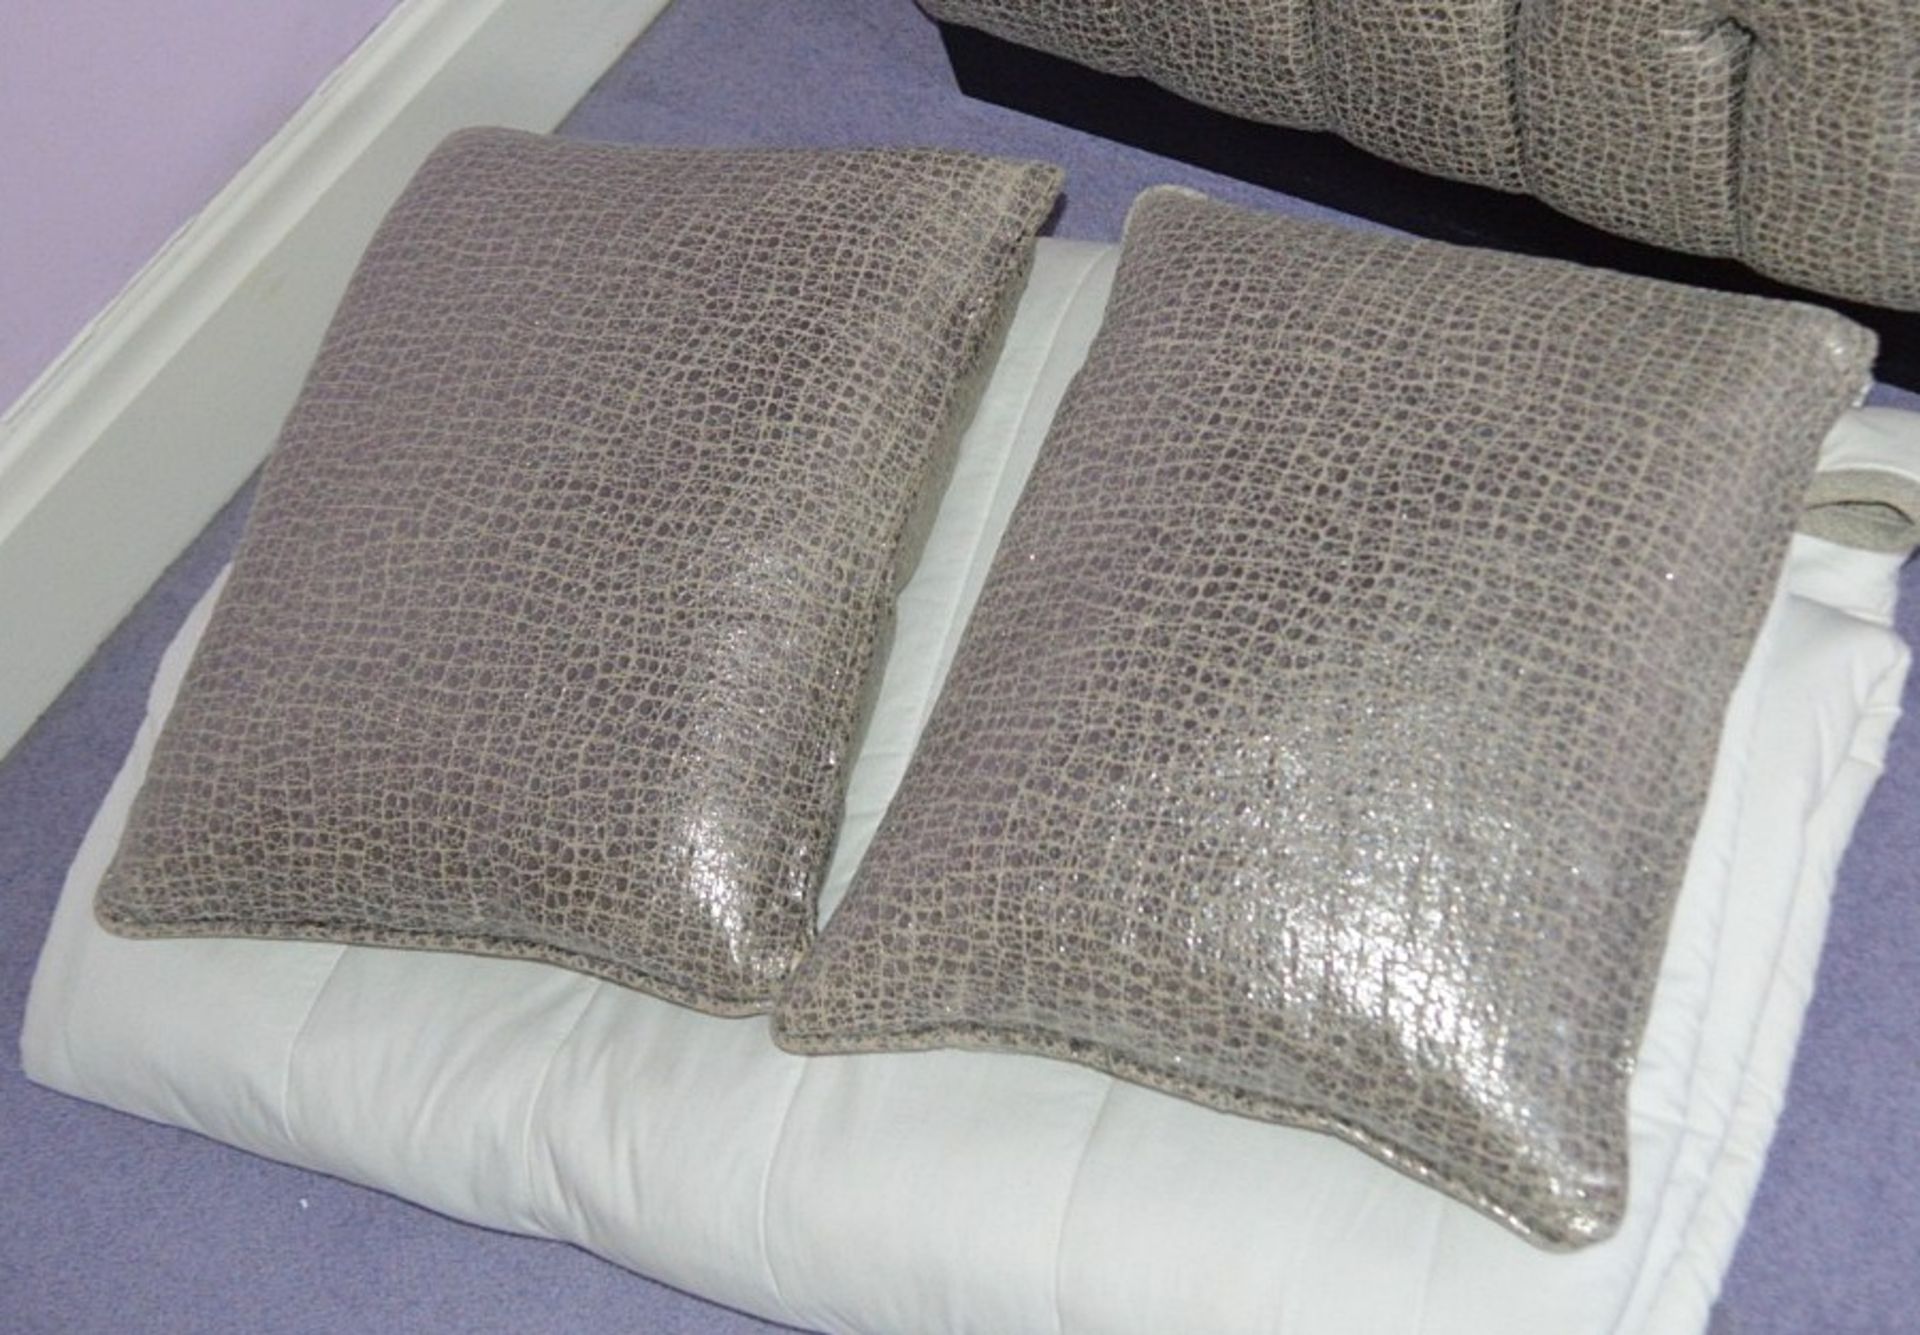 1 x Button Back Footstool In Silver With 2 x Matching Cushions - Dimensions: H45 x W78 x D40cm - Image 2 of 2